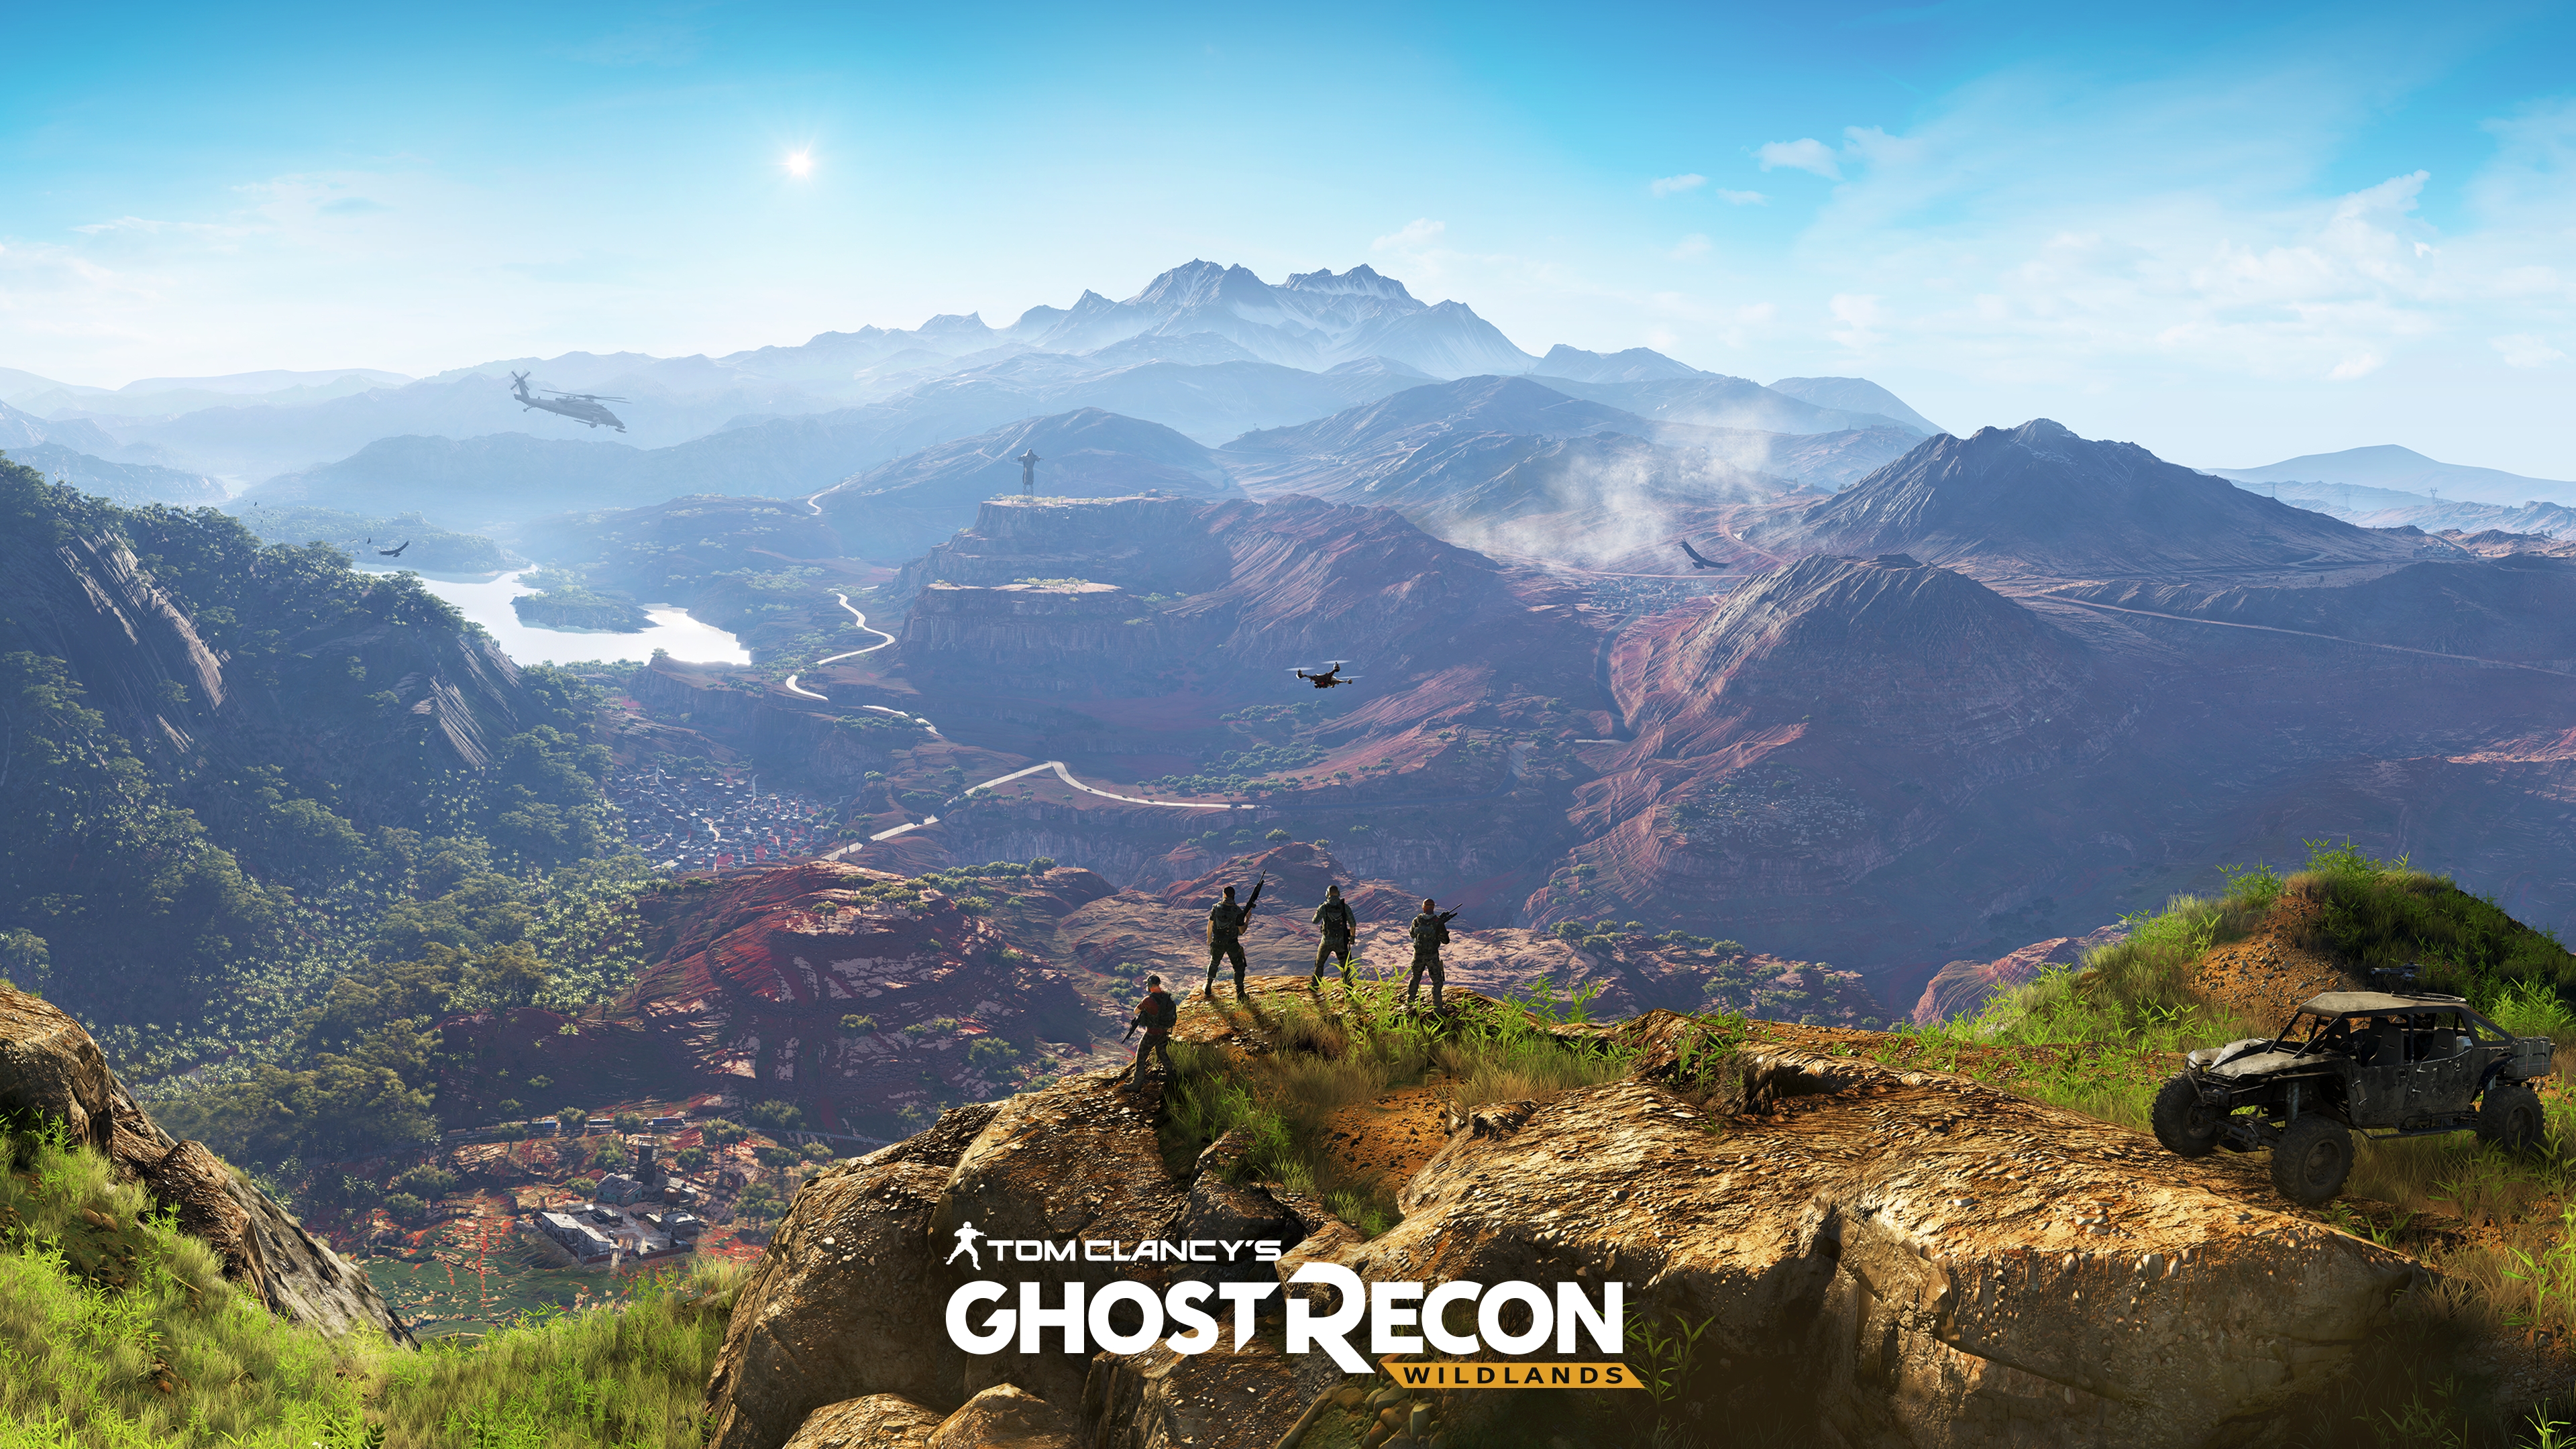 Ubisoft Announces Tom Clancy's Recon Wildlands; Legendary Military Shooter Franchise Goes Open World | Business Wire